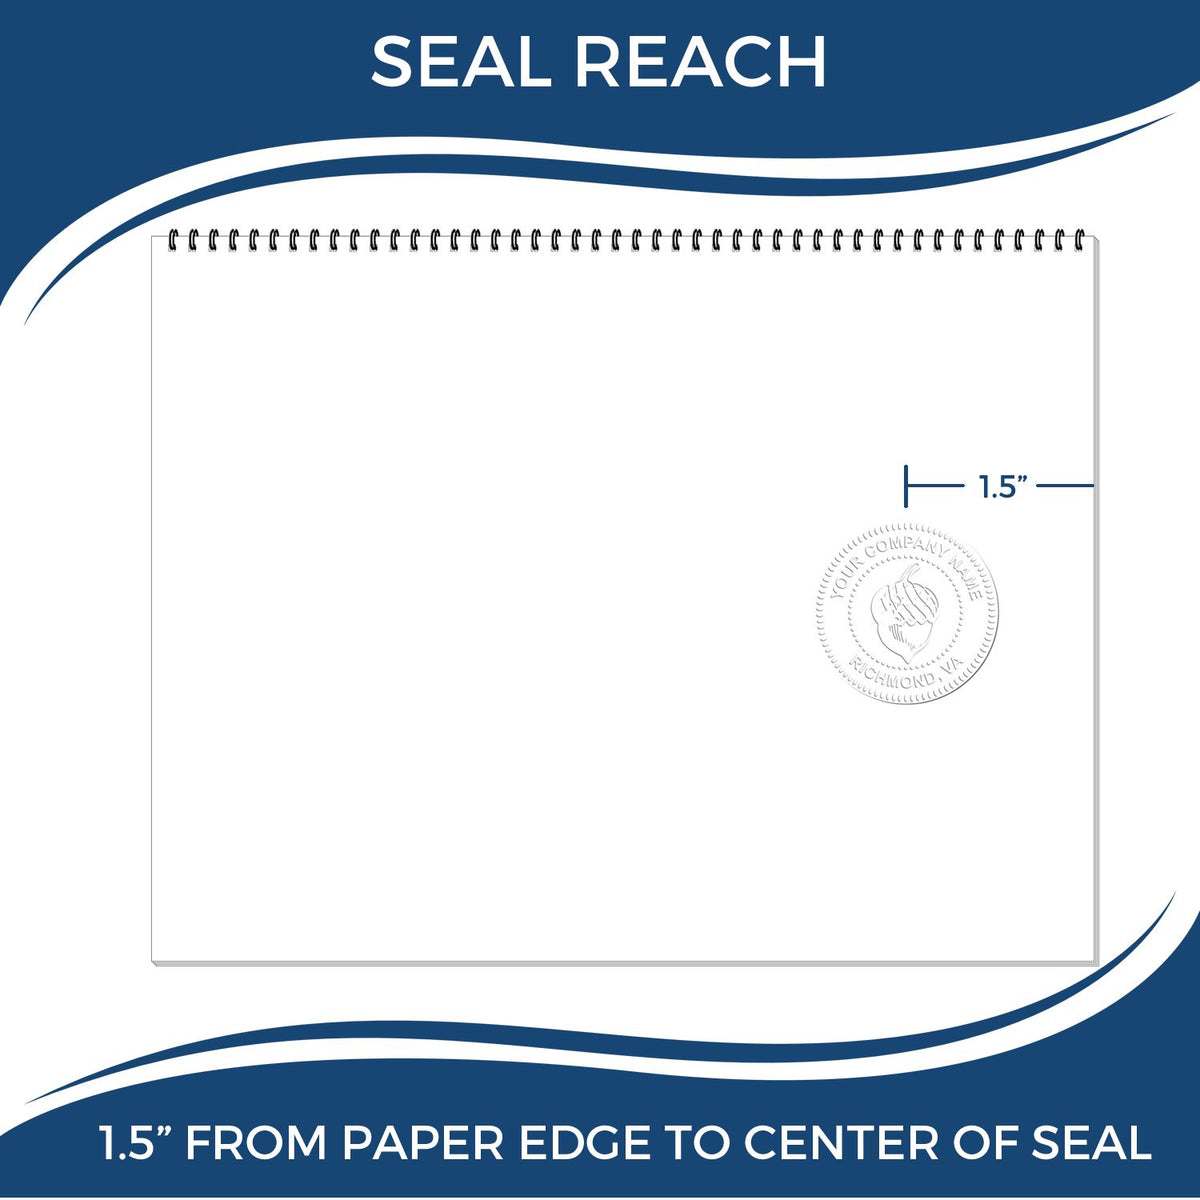 An infographic showing the seal reach which is represented by a ruler and a miniature seal image of the Pennsylvania Engineer Desk Seal